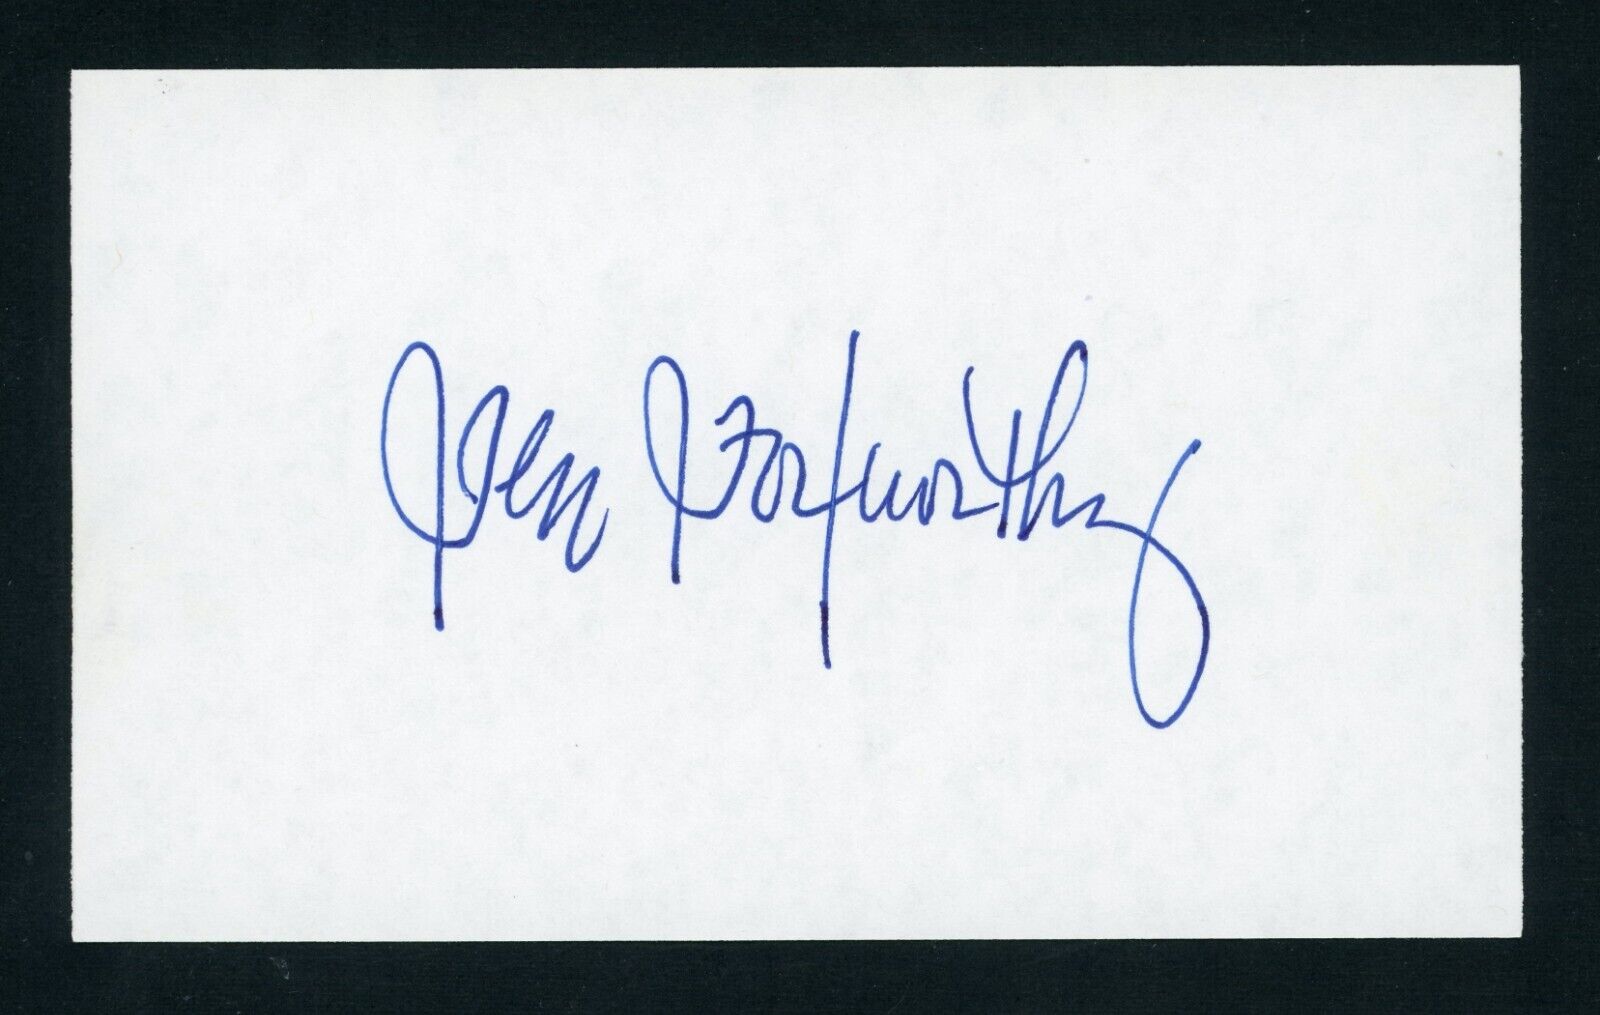 Jeff Foxworthy Comedian/Actor Signed 3x5 Index Card E25161